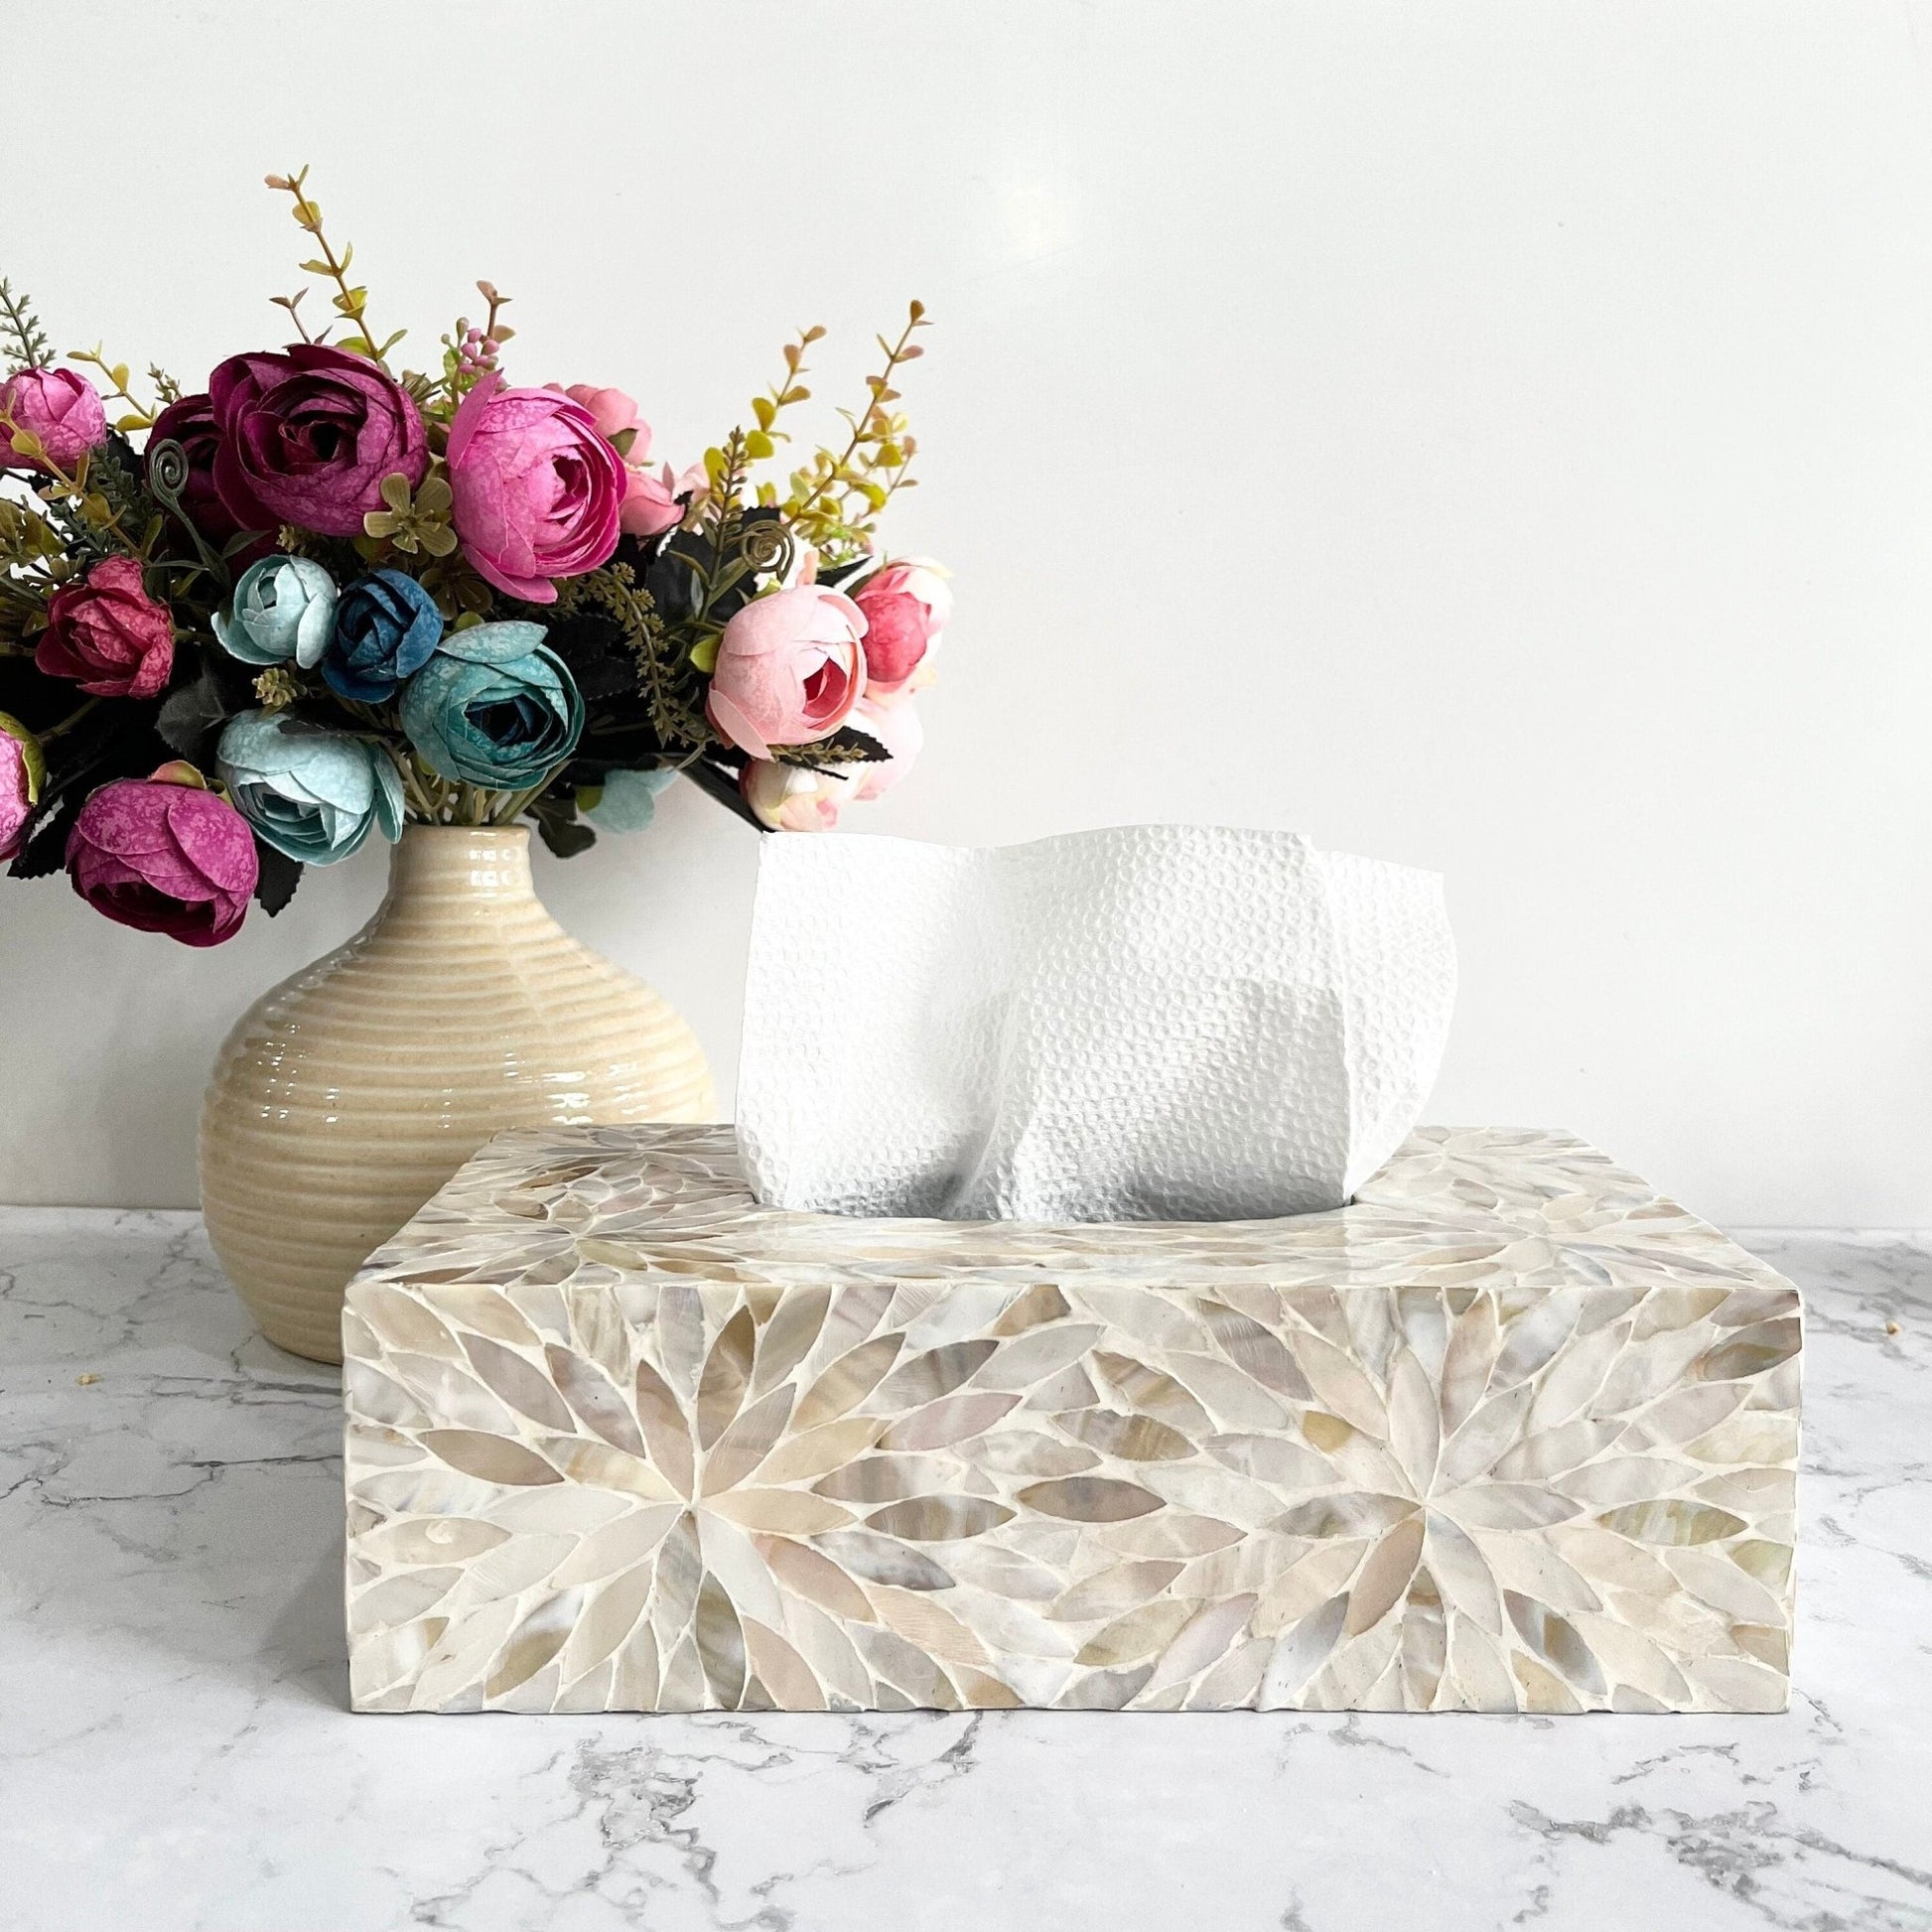 Mother of pearl inlay rectangle tissue box holder with floral pattern vintage stylePremiumWoodArt